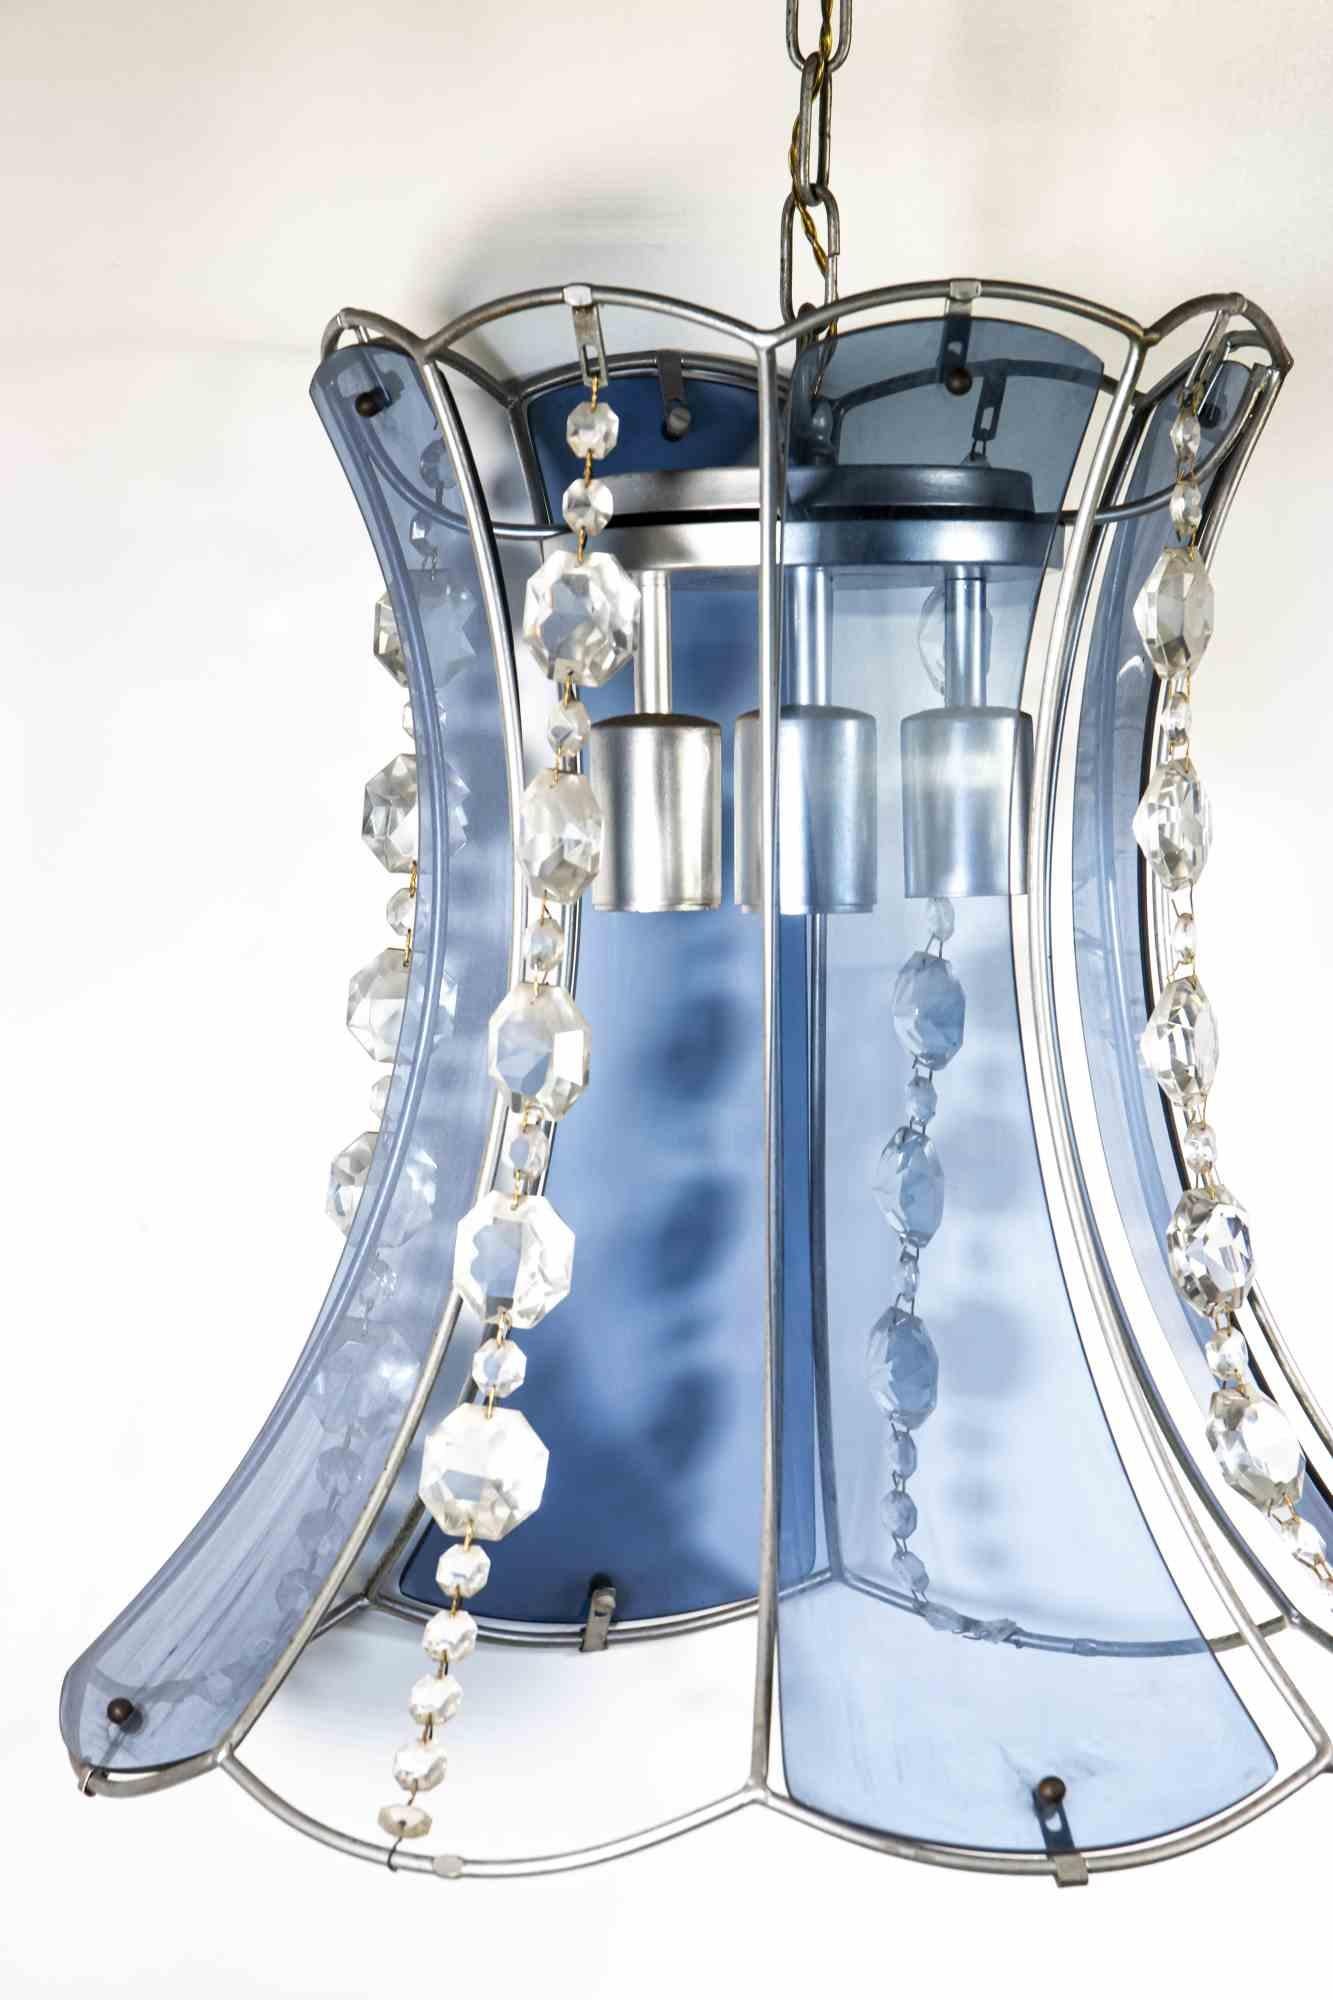 Crystal blue chandelier is an original design lamp realized in the half of 20th century by Italian designer.

A very elegant chandelier composed by blue Murano glass and embellished with crystal drops

Mint conditions.

Decor your room with